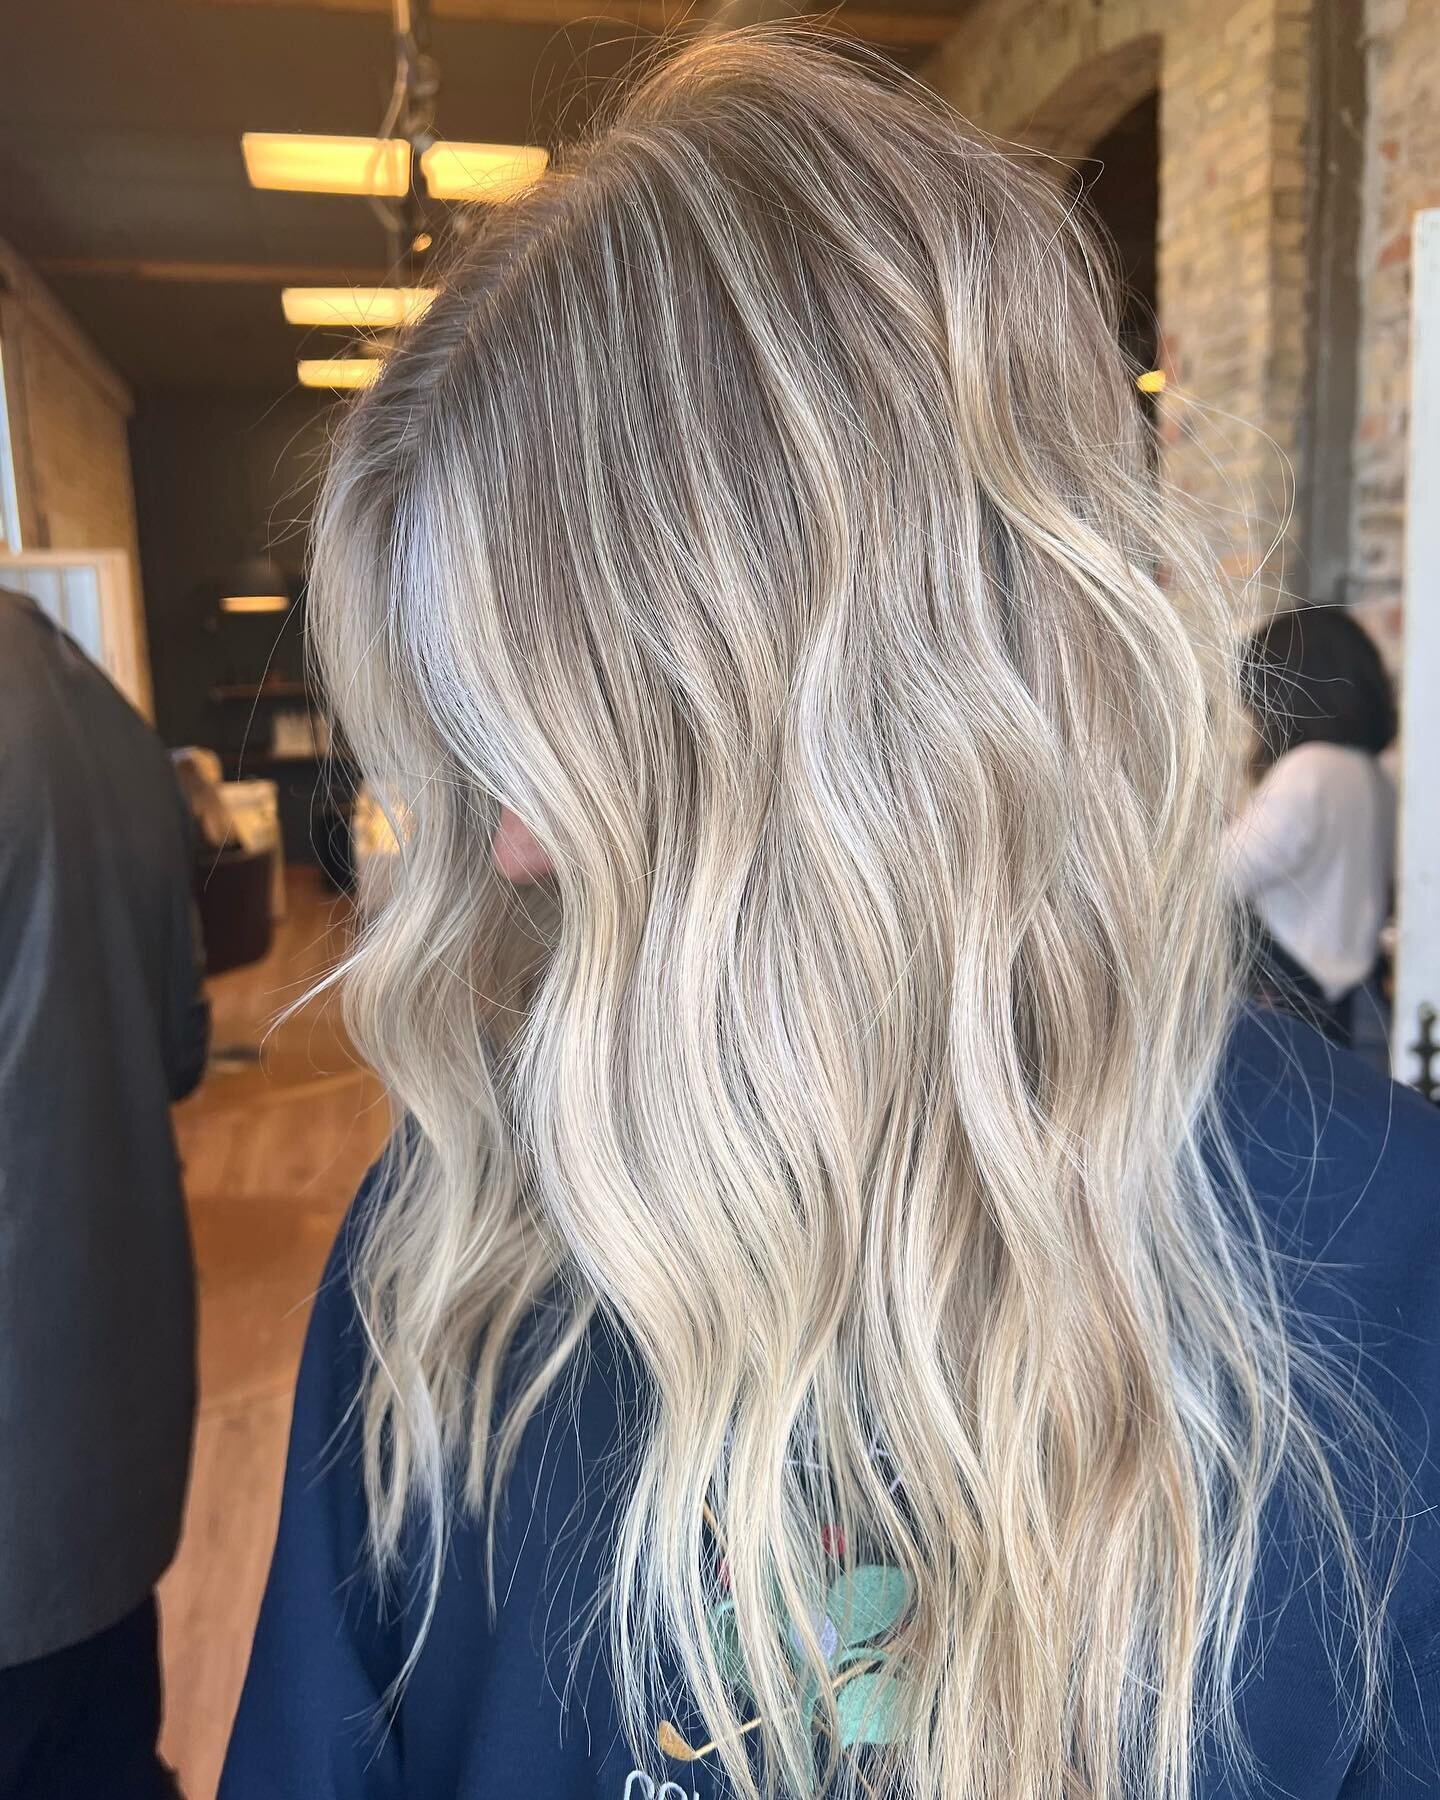 This blonde doesn&rsquo;t come from a box 💁🏼&zwj;♀️
_______________________________
@peyton.cosmetology 💅🏻 
.
.
#downtowntc #traversecity #bellaamici #bellaamicitc #nomi #northernmichigan #blondespecialist #blondesquad #fall2023